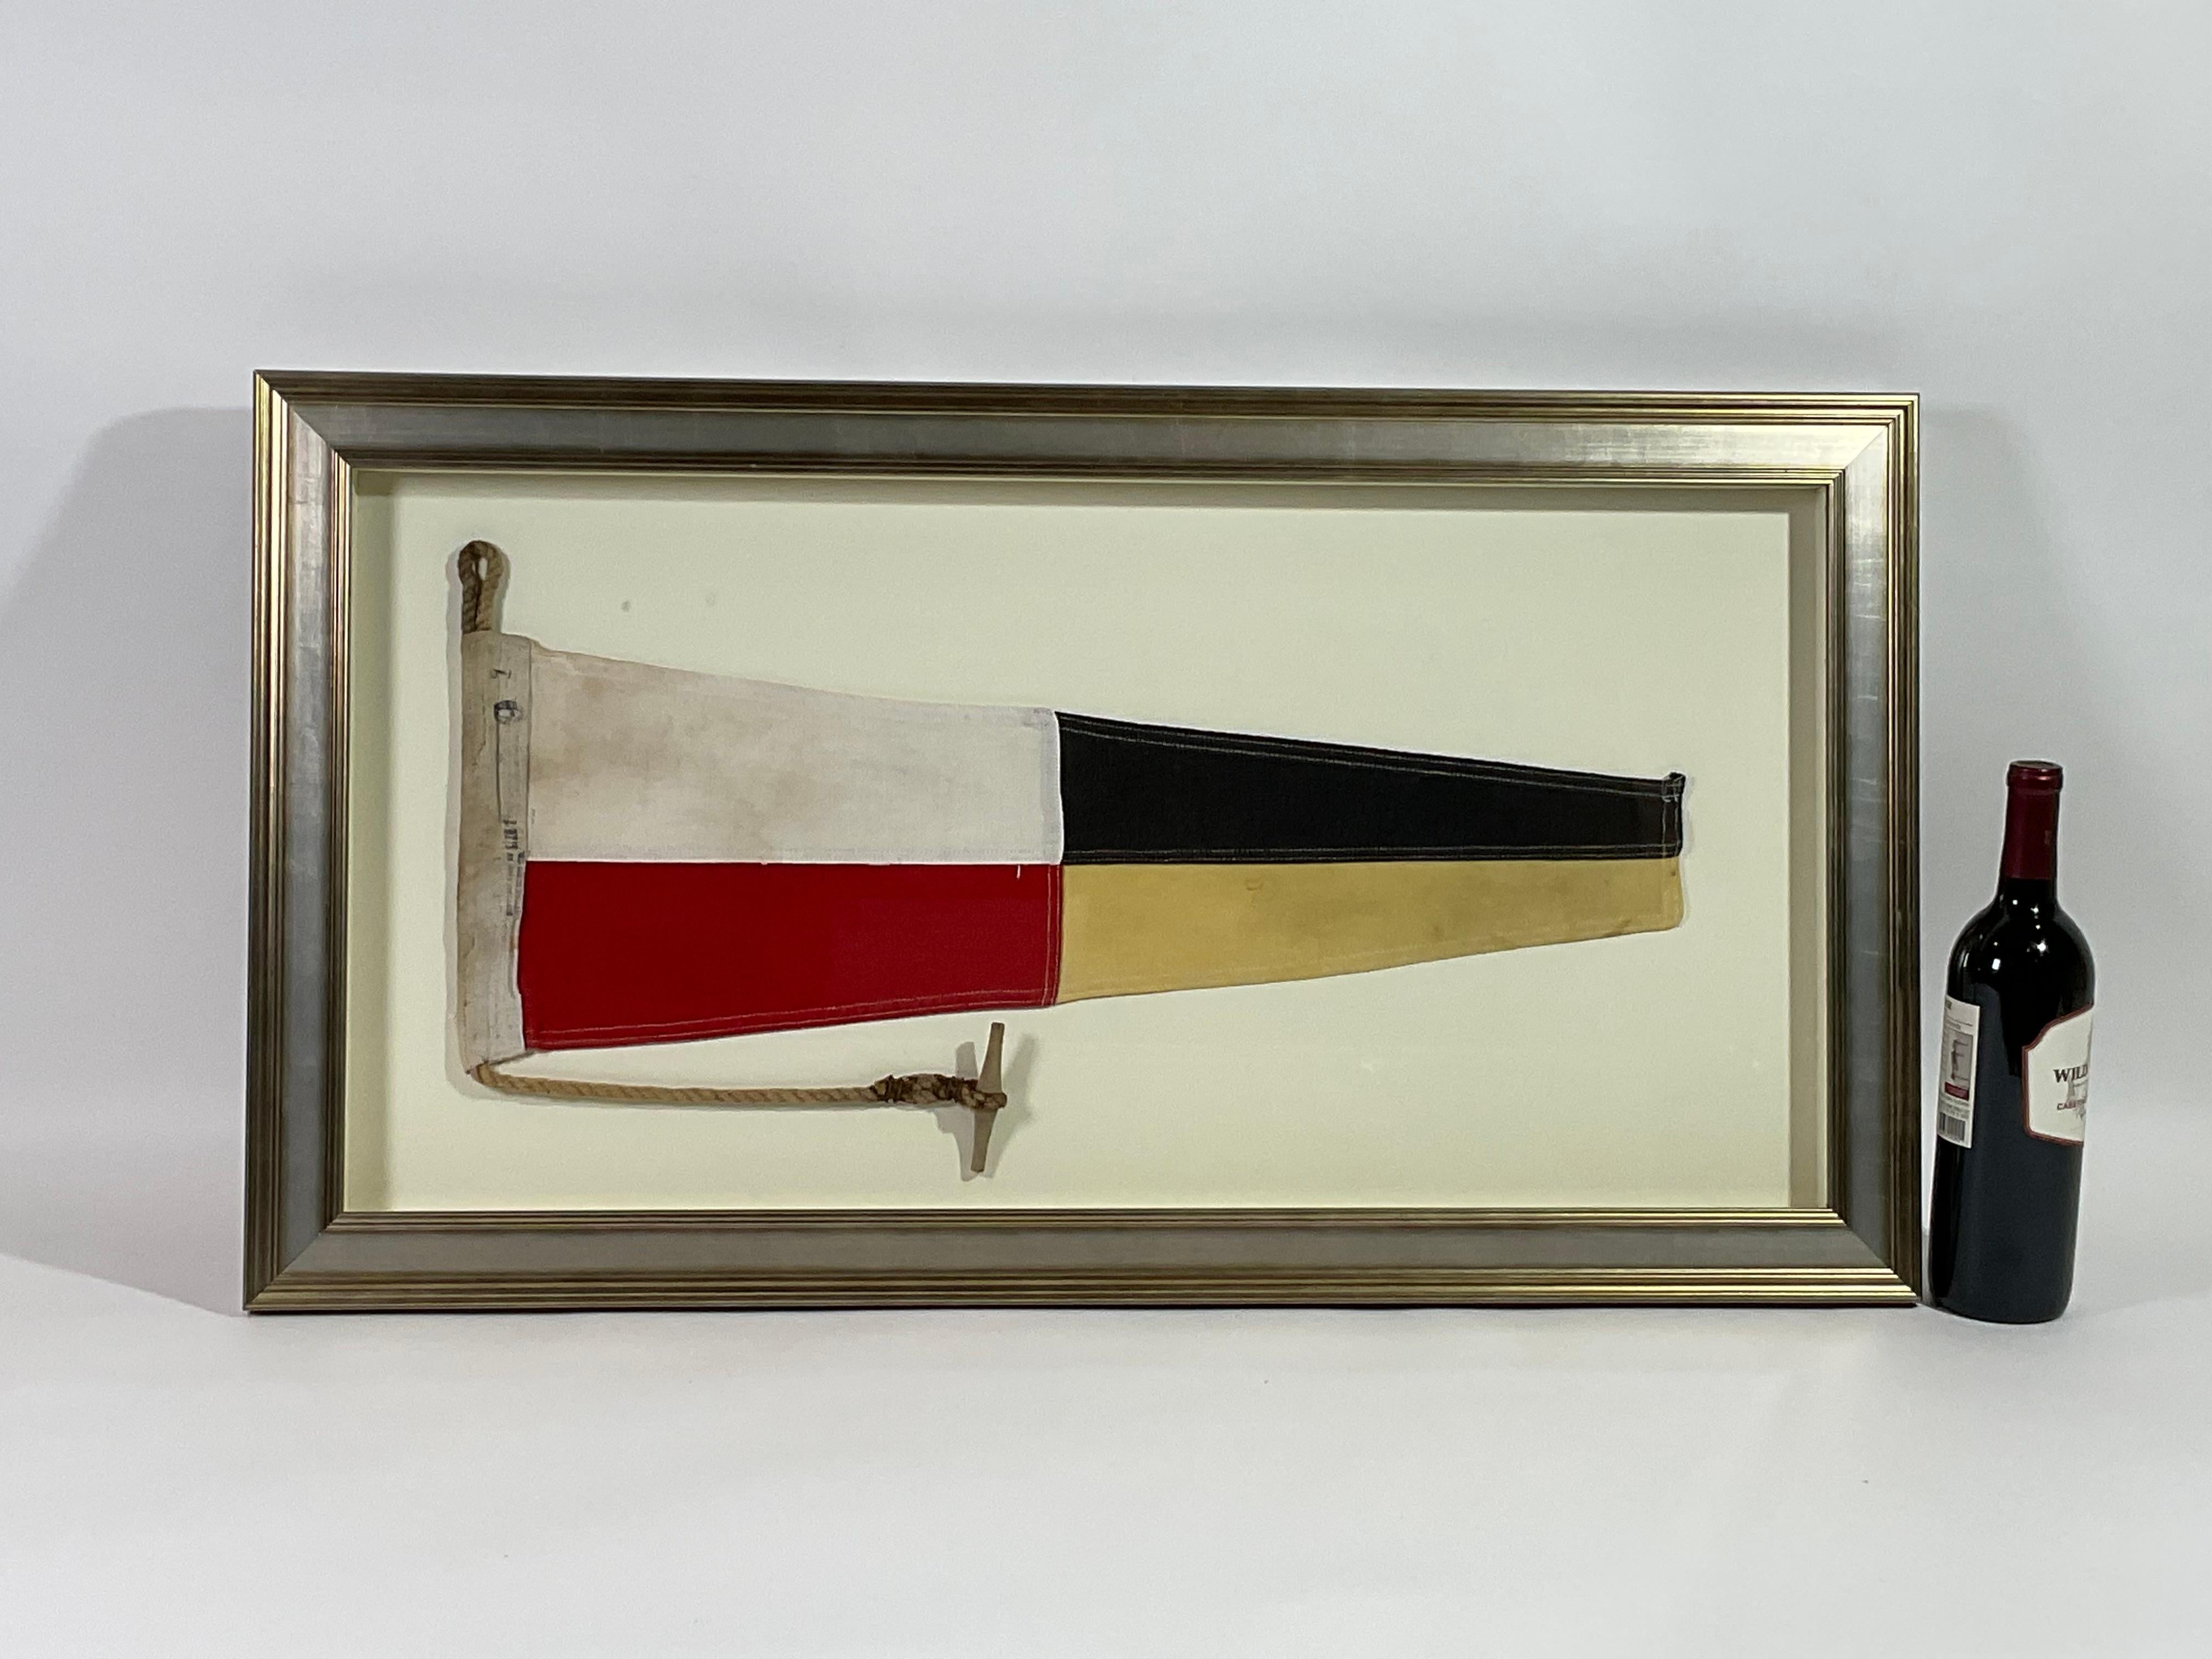 Framed maritime signal flag representing the number “7”, “SEVEN” in the international code of signals. This authentic and ocean used pennant is made of individual panels of yellow and red. Fitted to a heavy canvas hoist band with original rope and